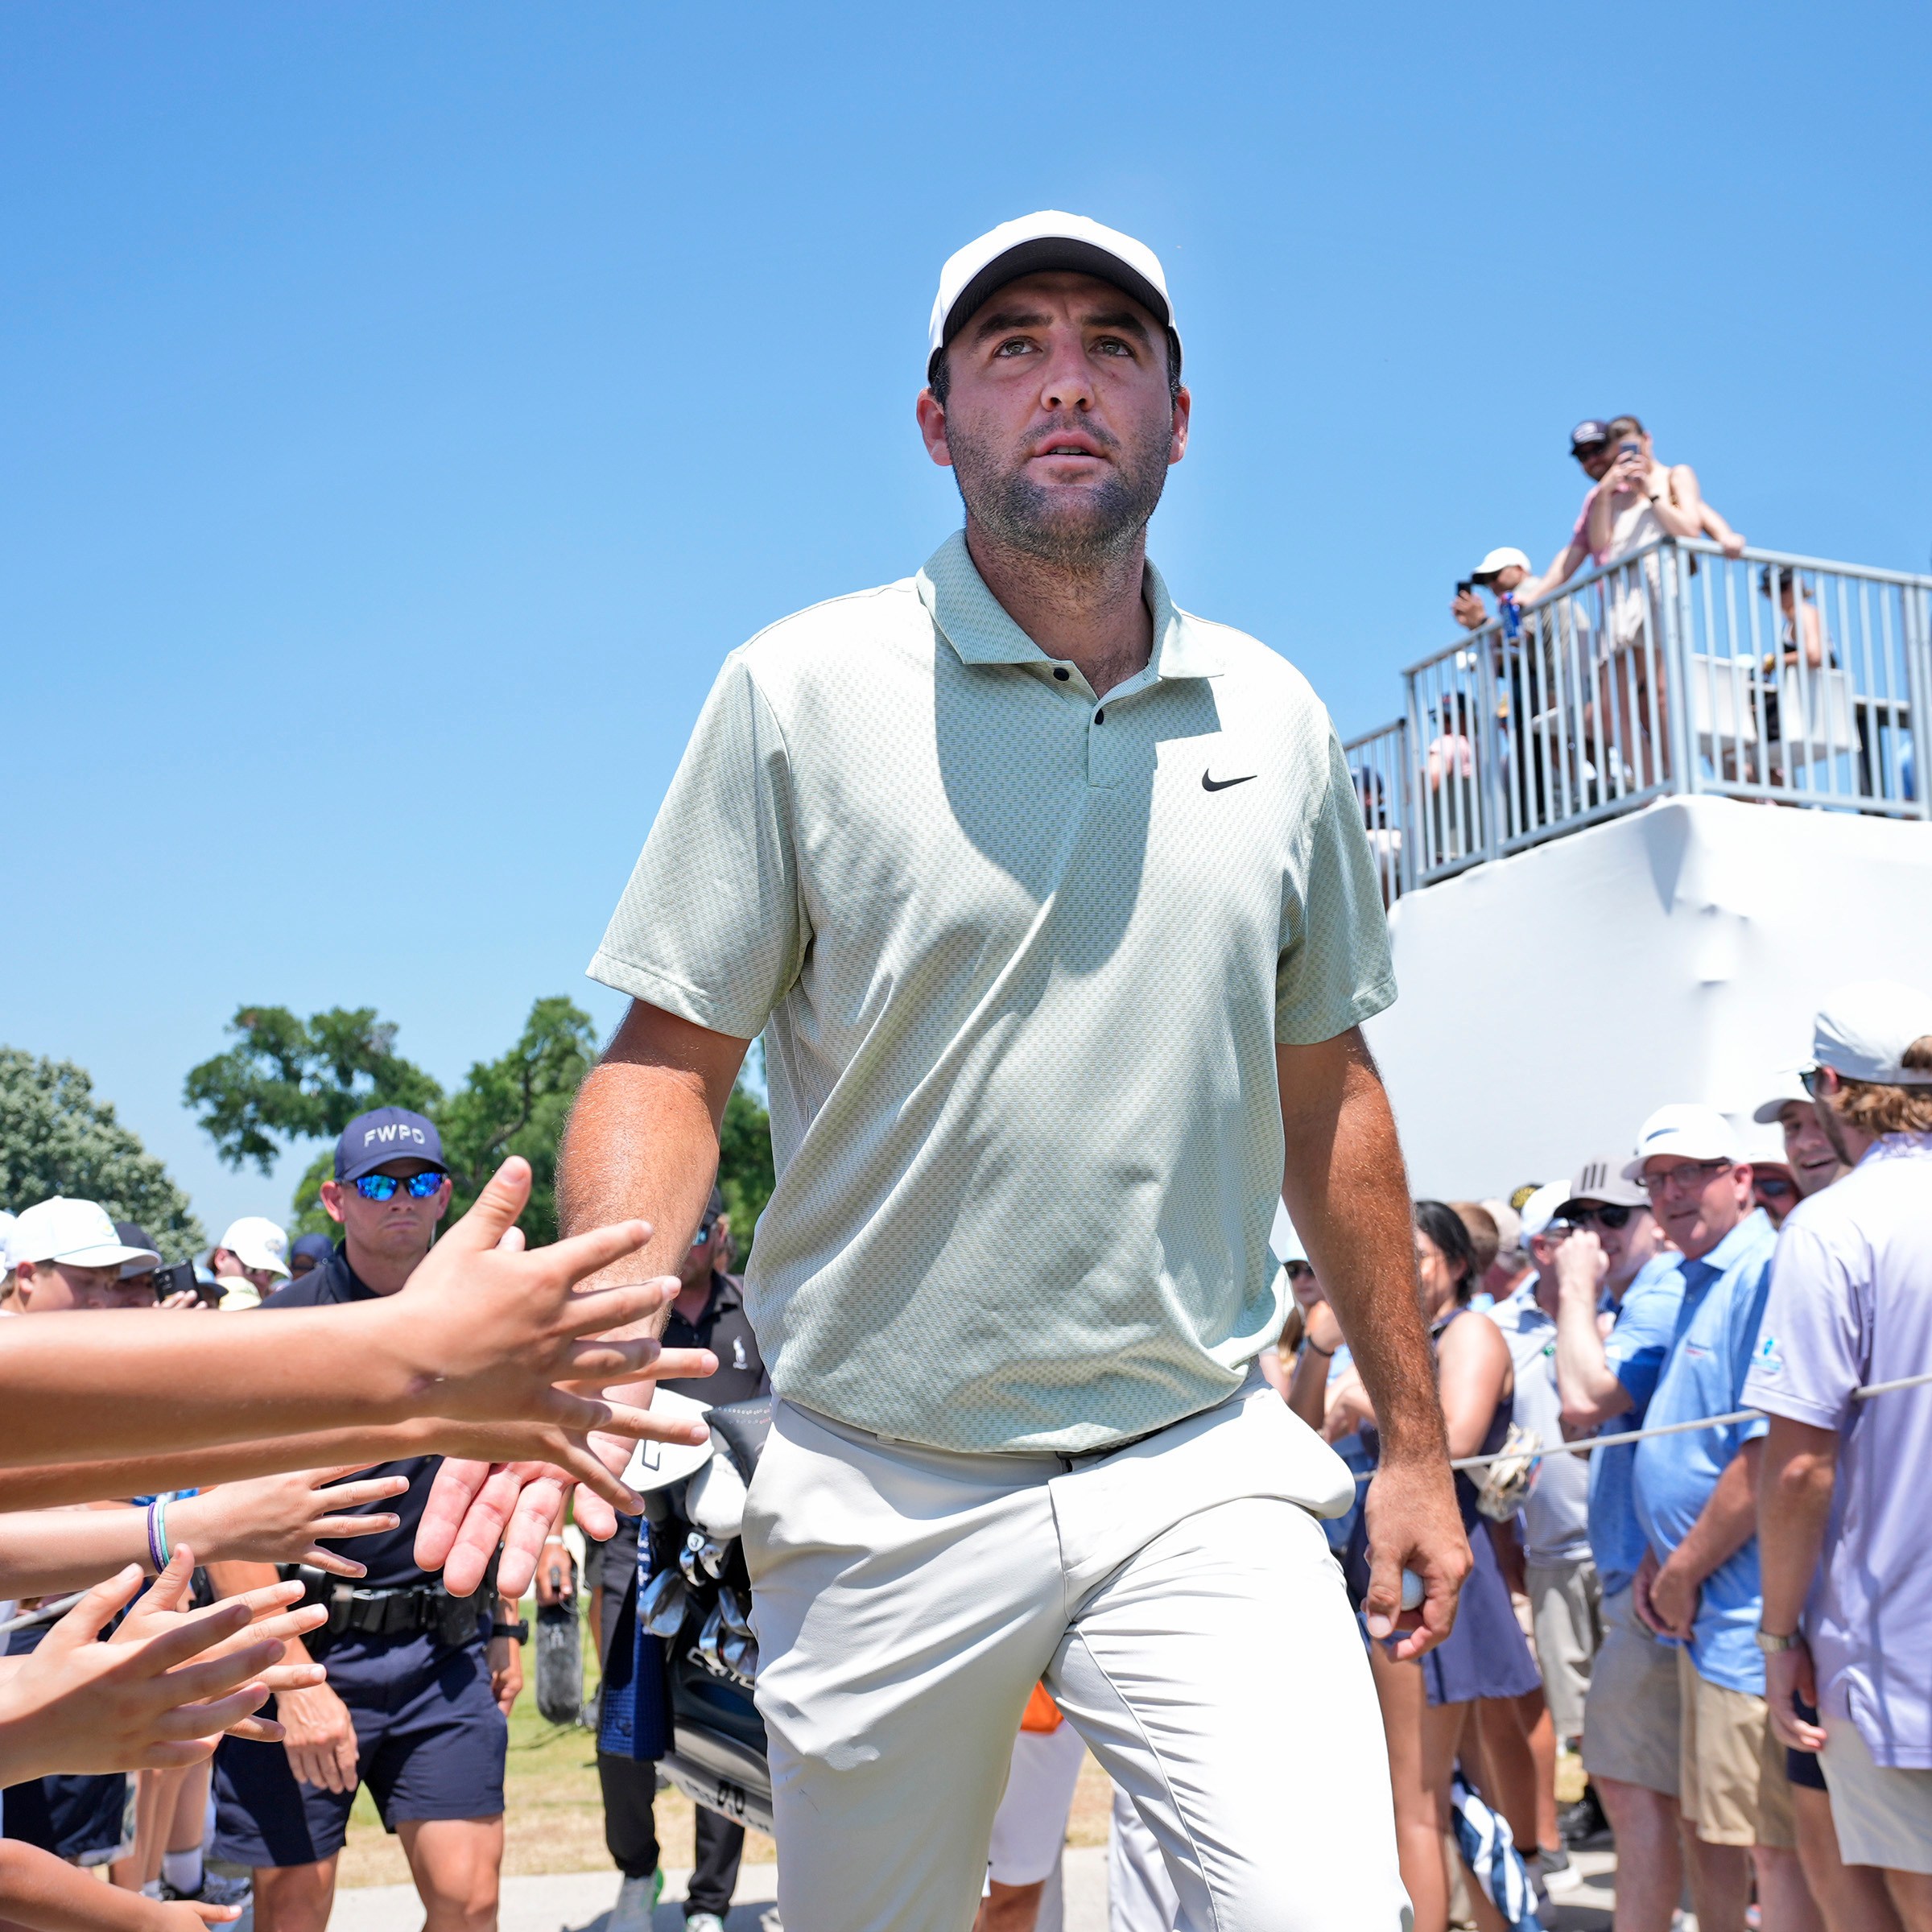 Scheffler has been told that he will not be charged after the incident involving a police officer outside the Valhalla club during the US PGA Championship